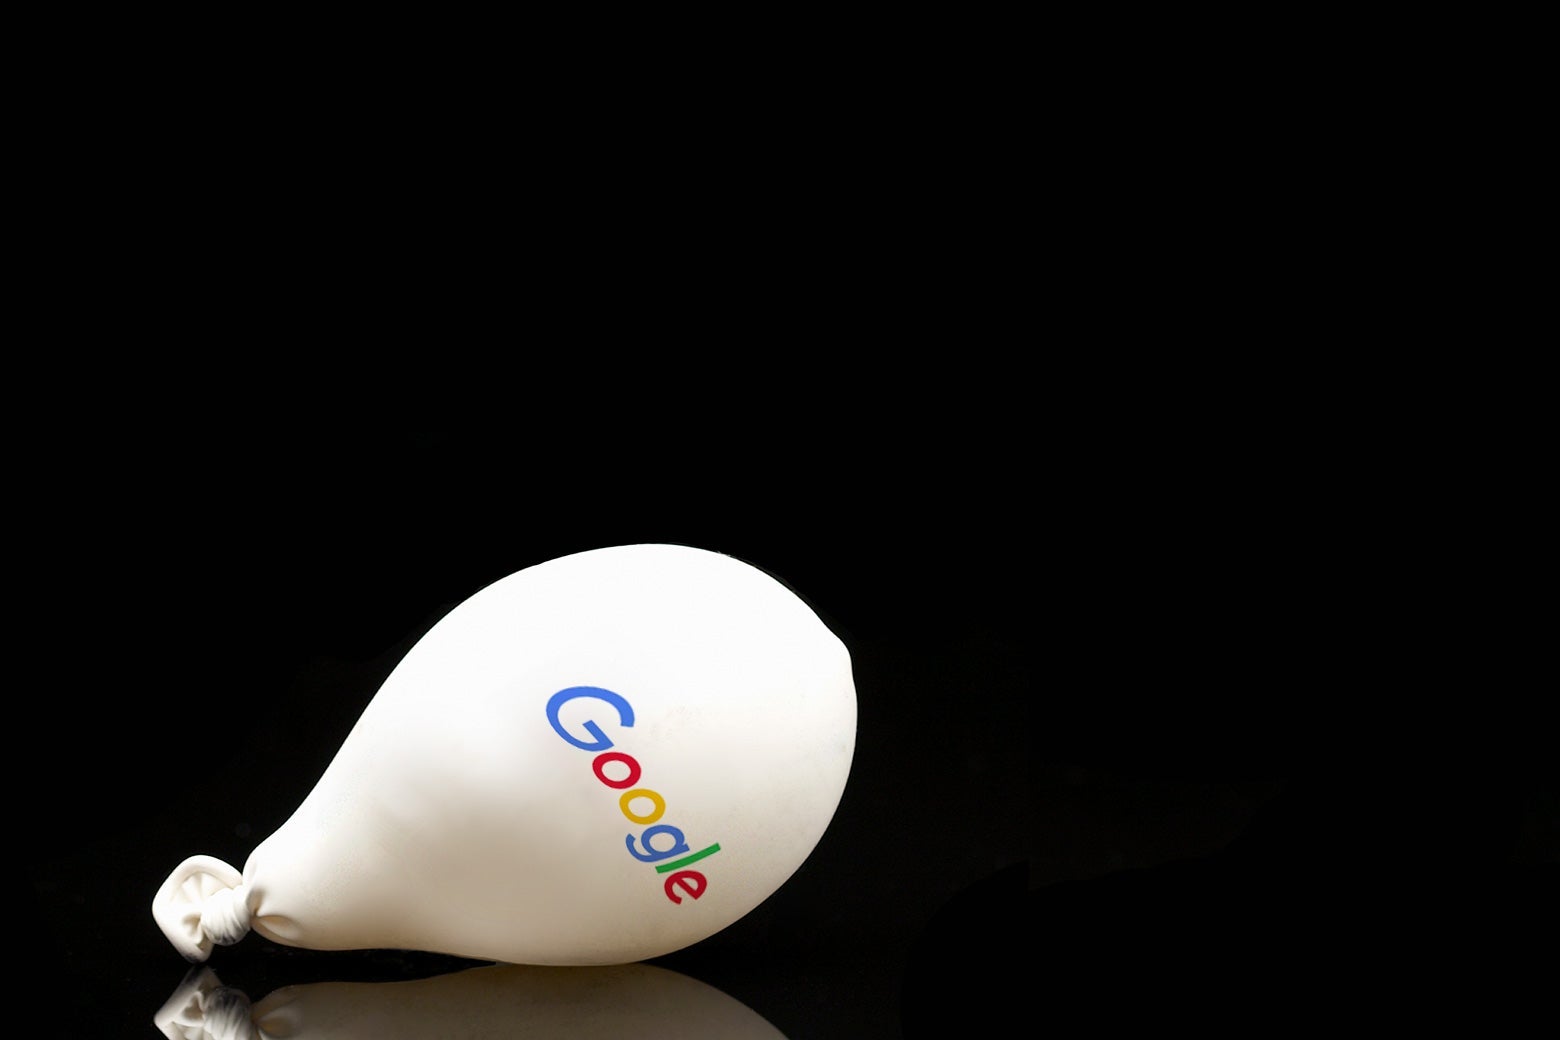 A deflating balloon with the Google logo on it